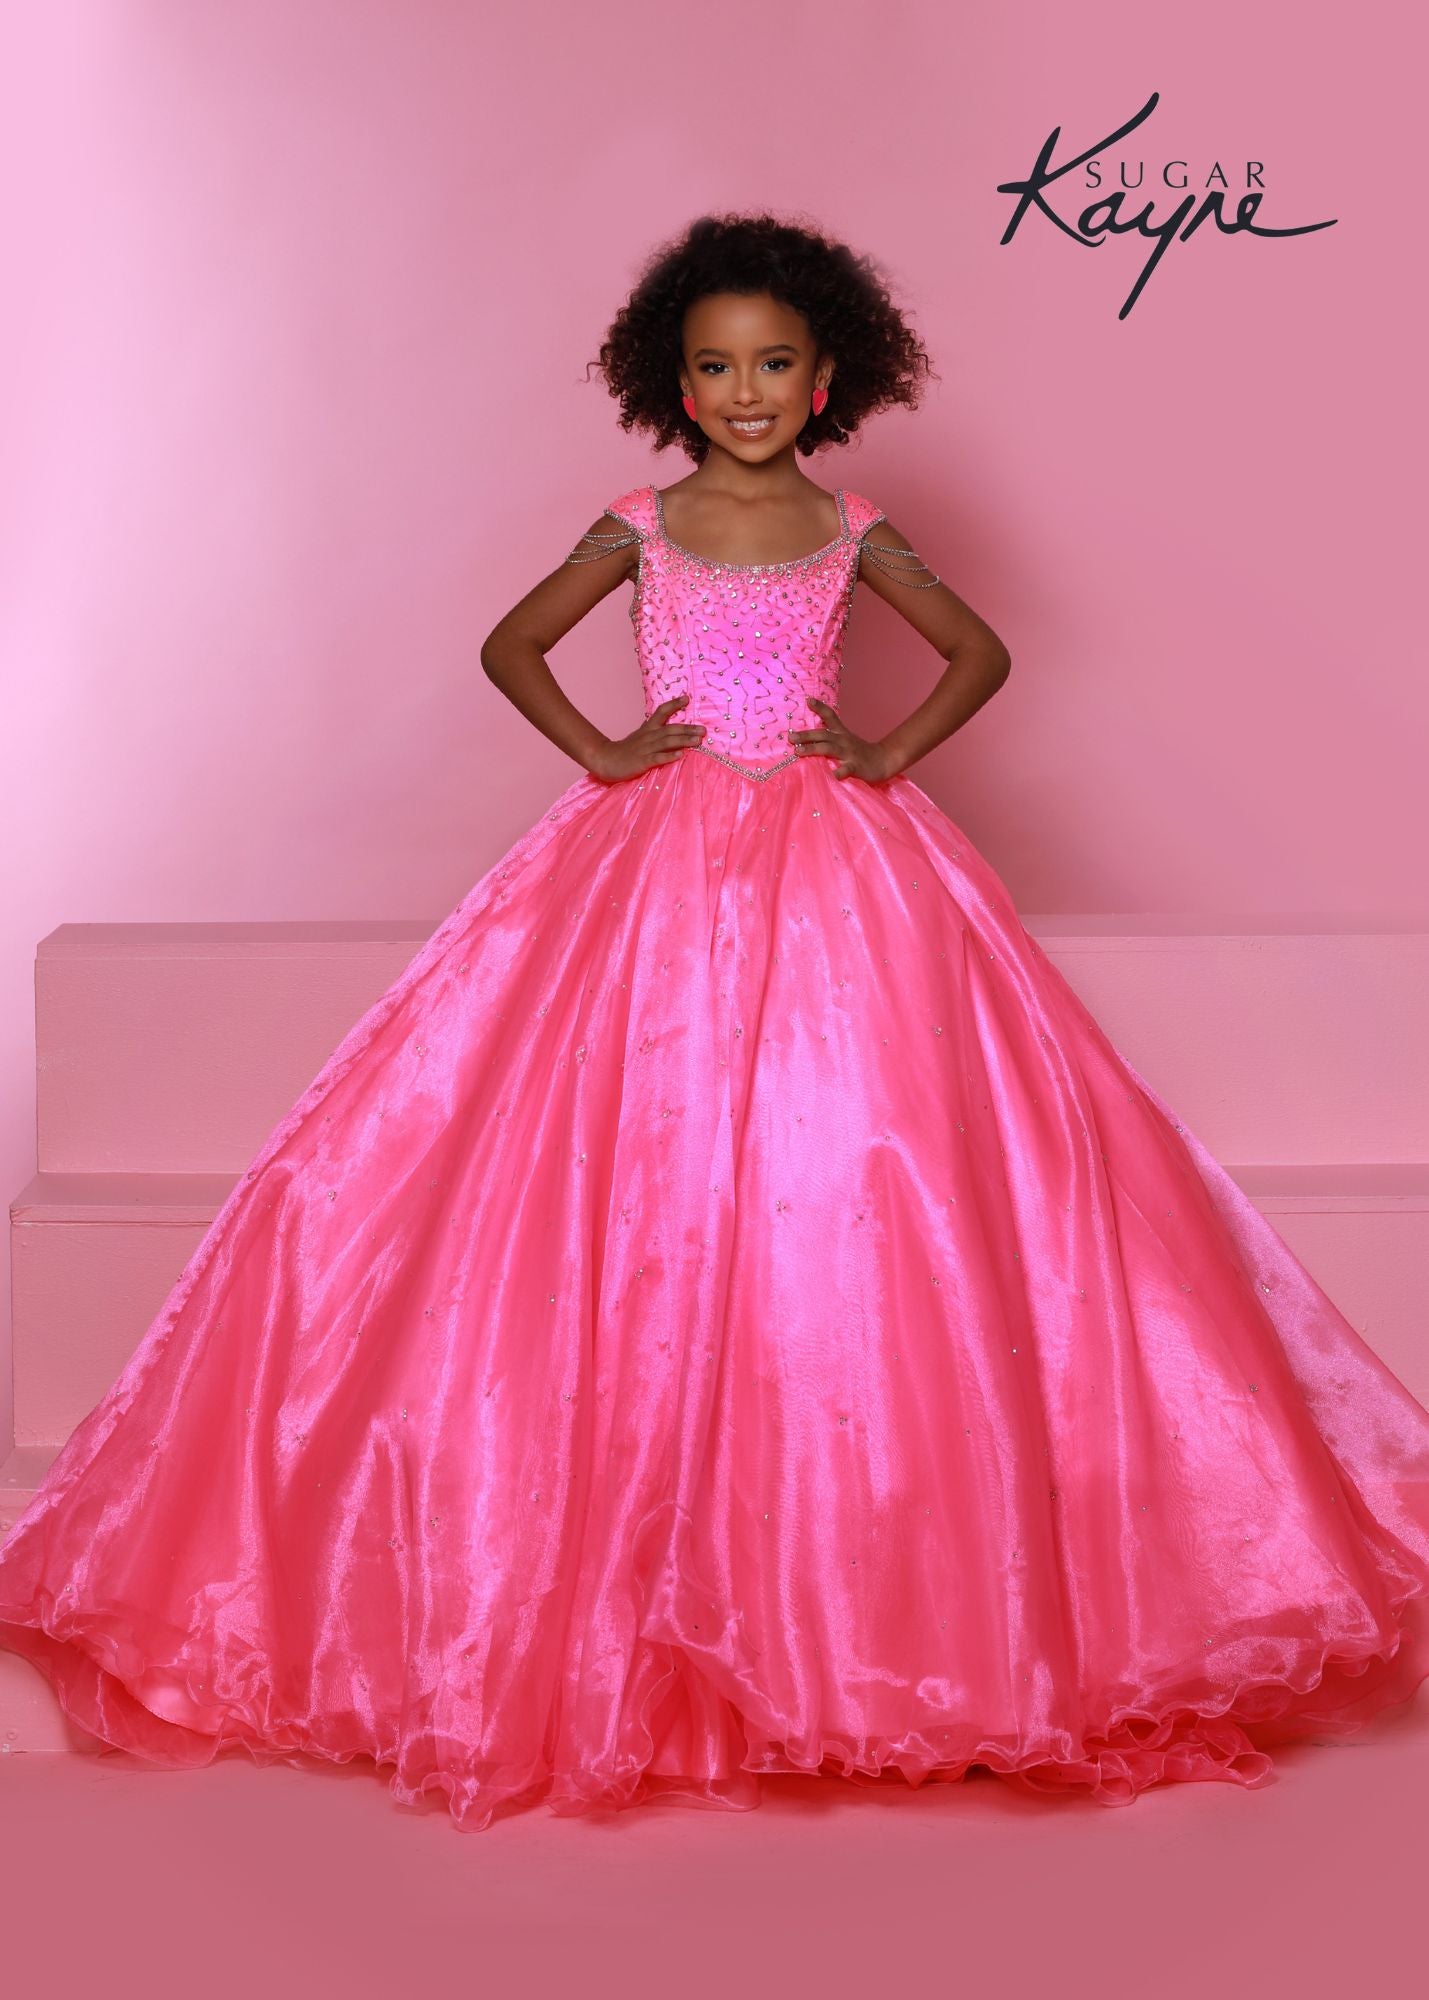 Sugar Kayne C309 Girls Crystal Tassel Cap Sleeve Pageant Dress Long Ball Gown Formal Secure the crown! This organza ballgown features a hand-beaded dropped waist bodice that is sure to elongate the waist. The cap sleeves feature detachable drapes for an extra flare.  Colors: Barbie Pink, Sherbert  Sizes: 2, 4, 6, 8, 10, 12, 14, 16  Fabric Organza, Mesh, Satin Lining